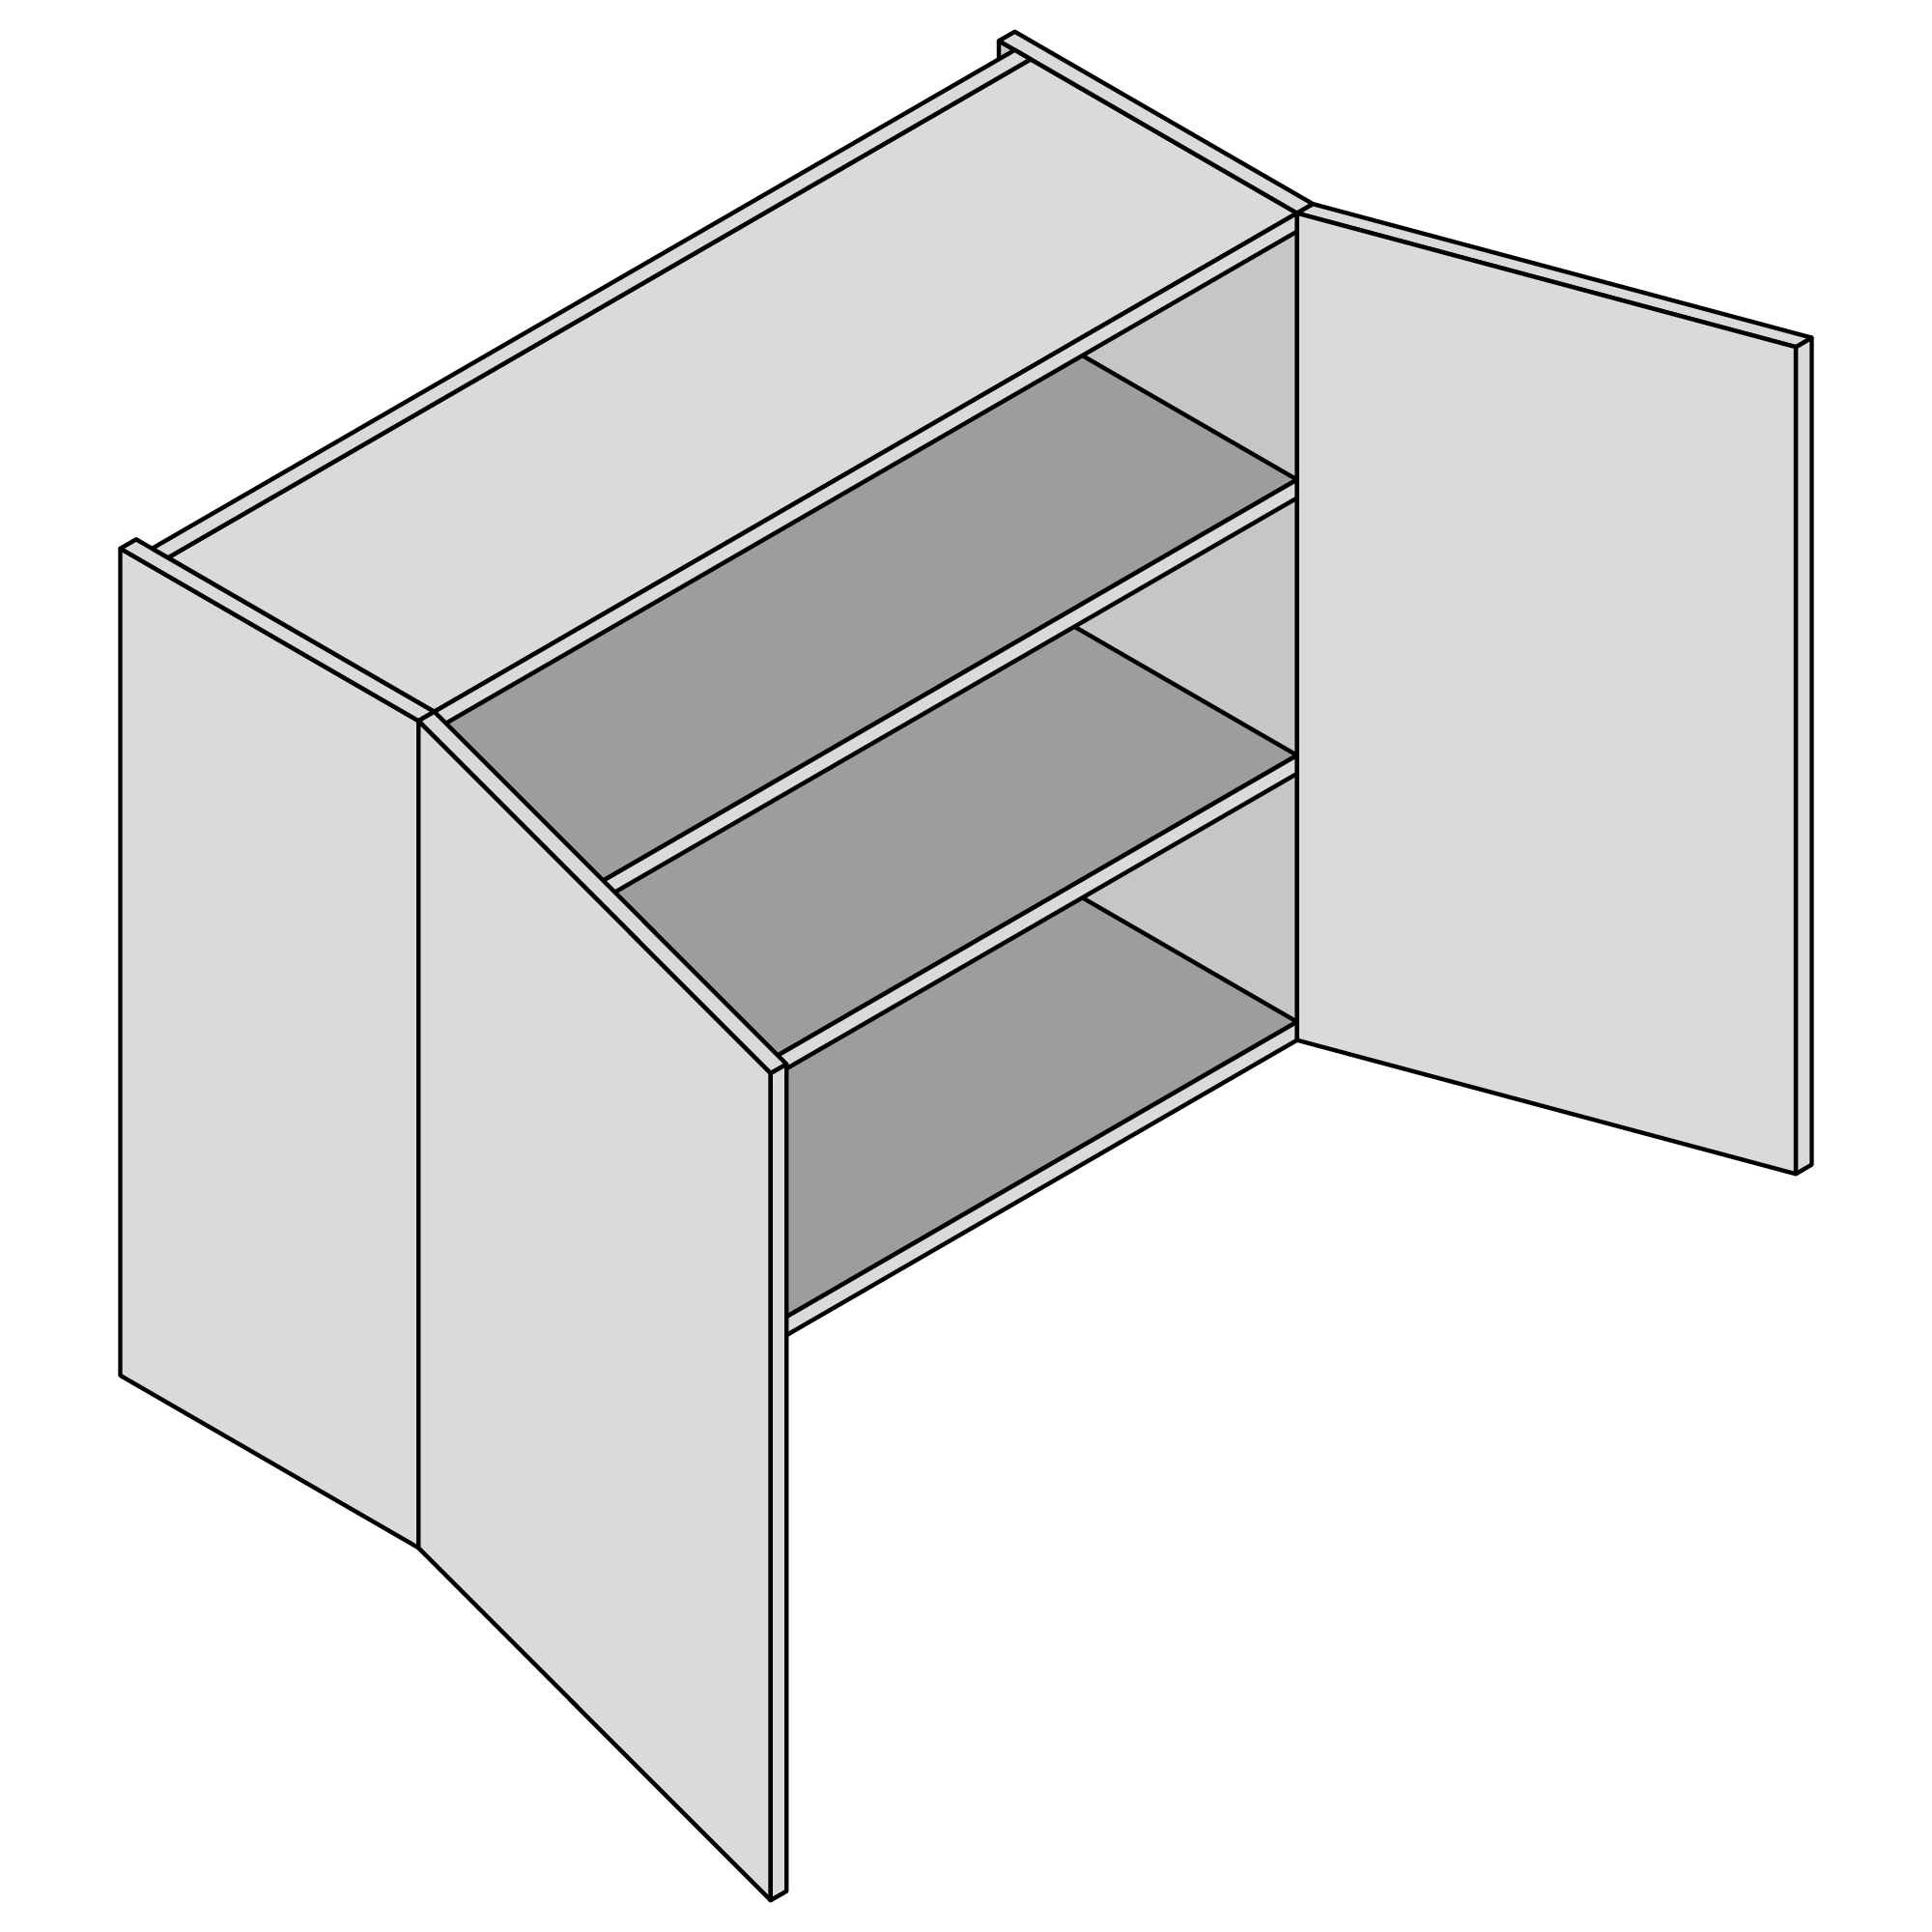 Diagram of an upper cabinet with two doors